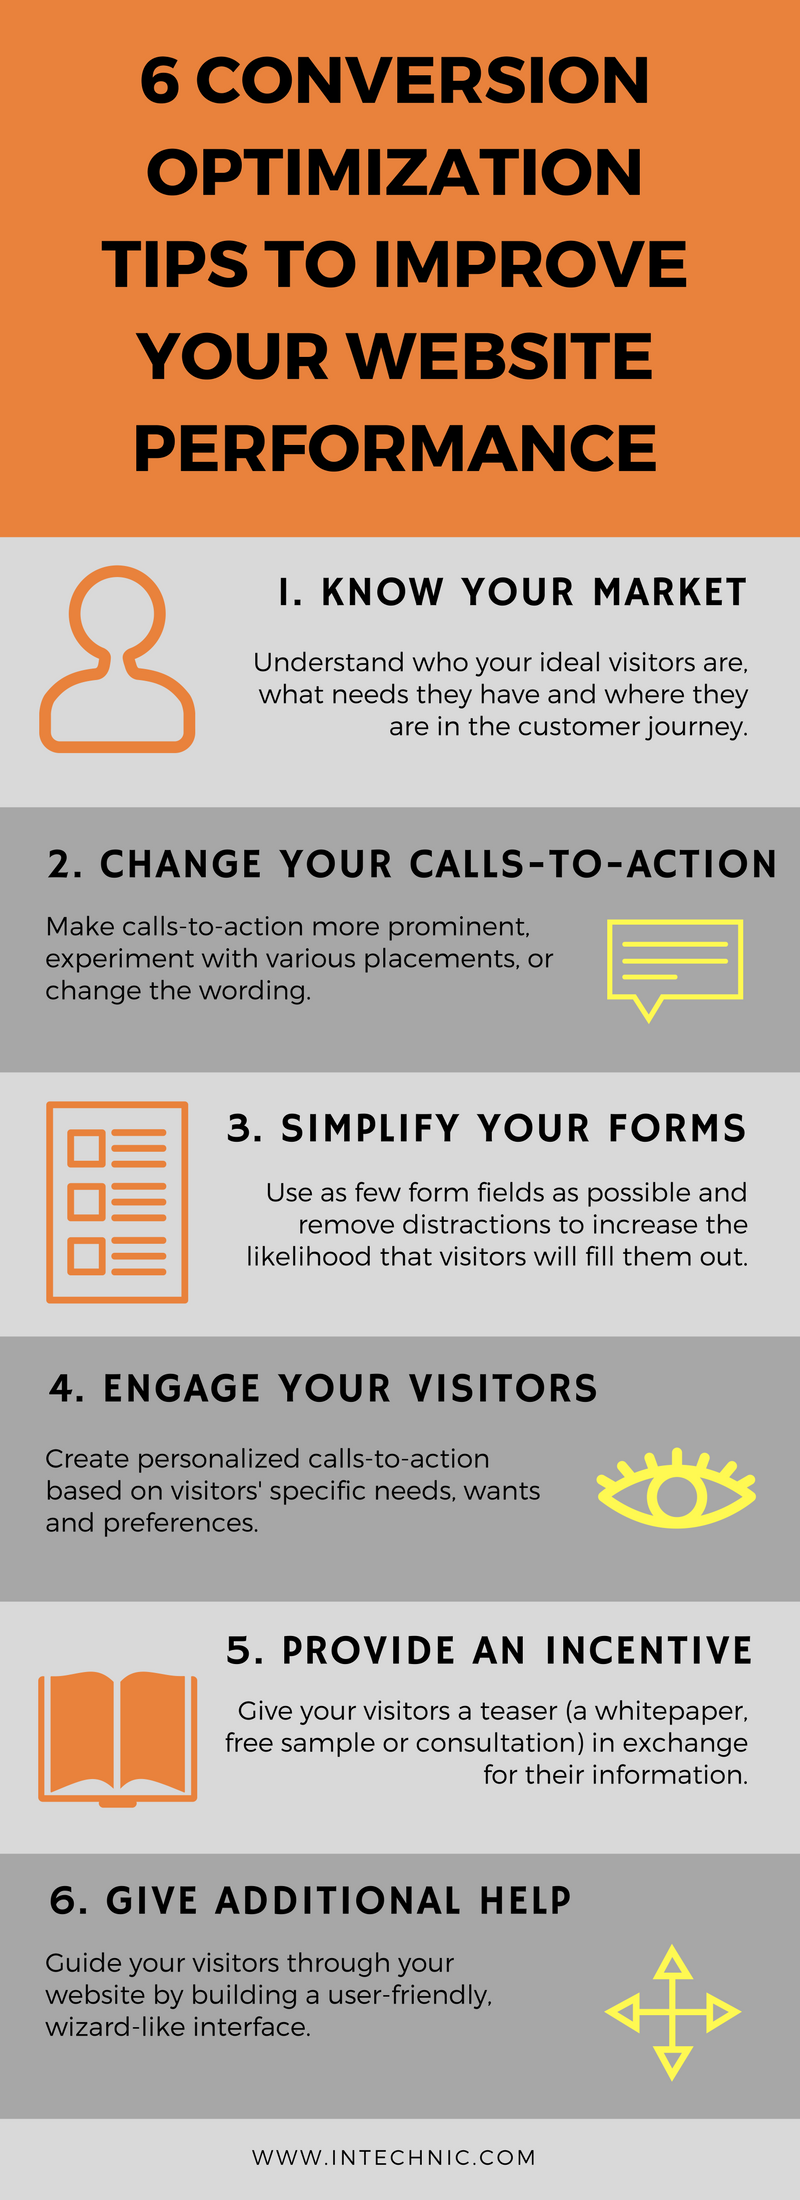 6 Conversion Optimization Tips - Infographic